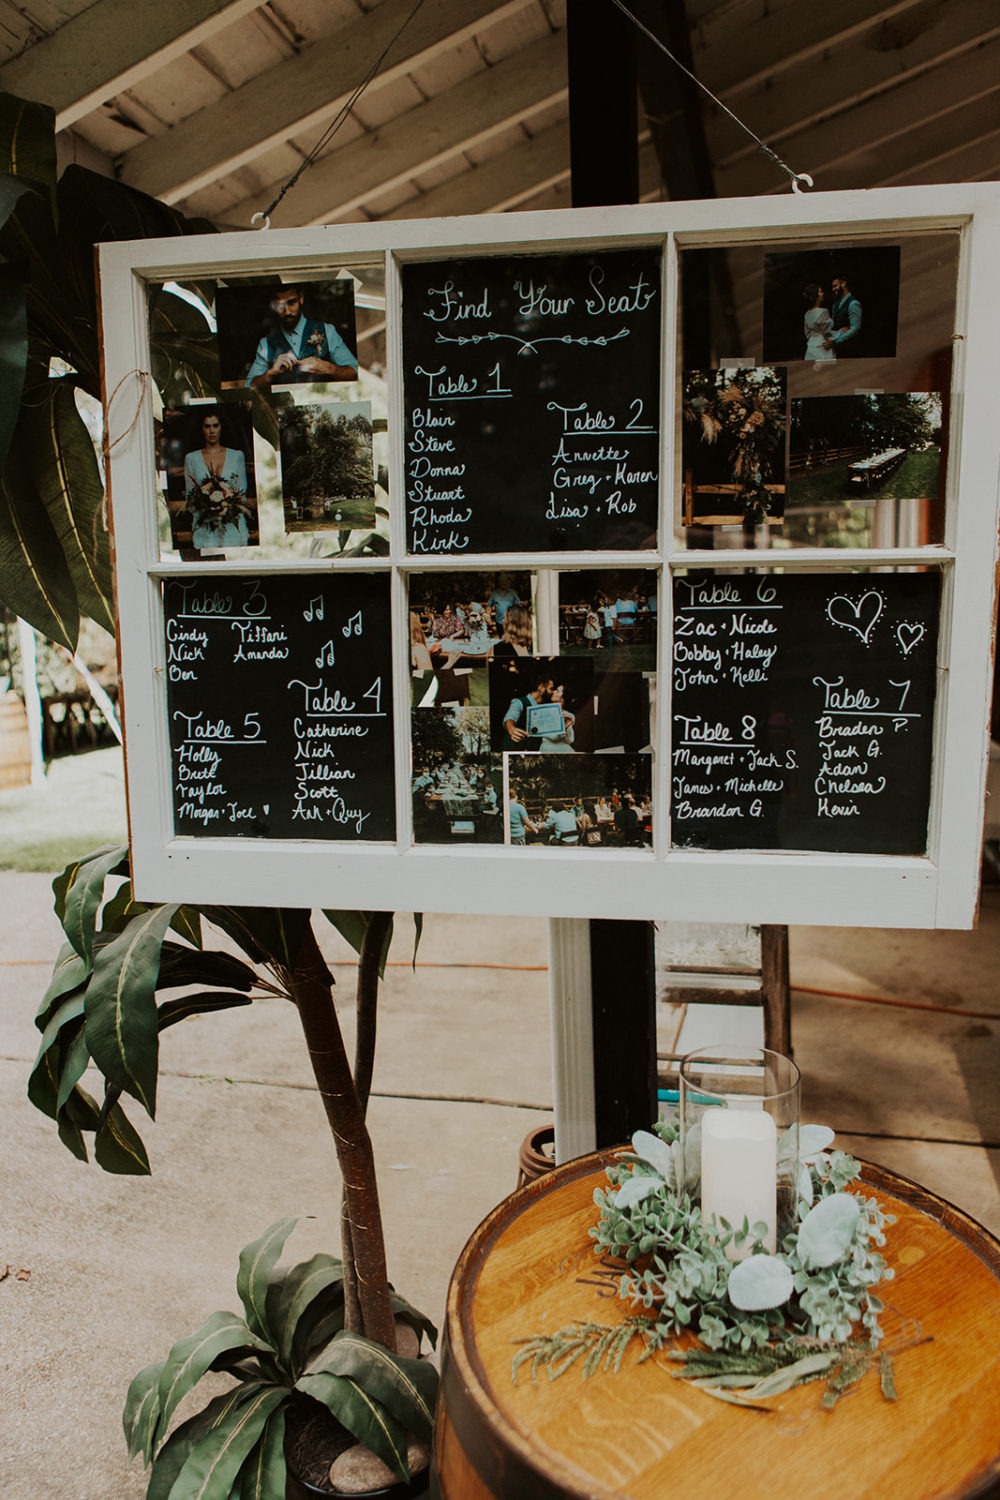 Table assignments with photos in a frame